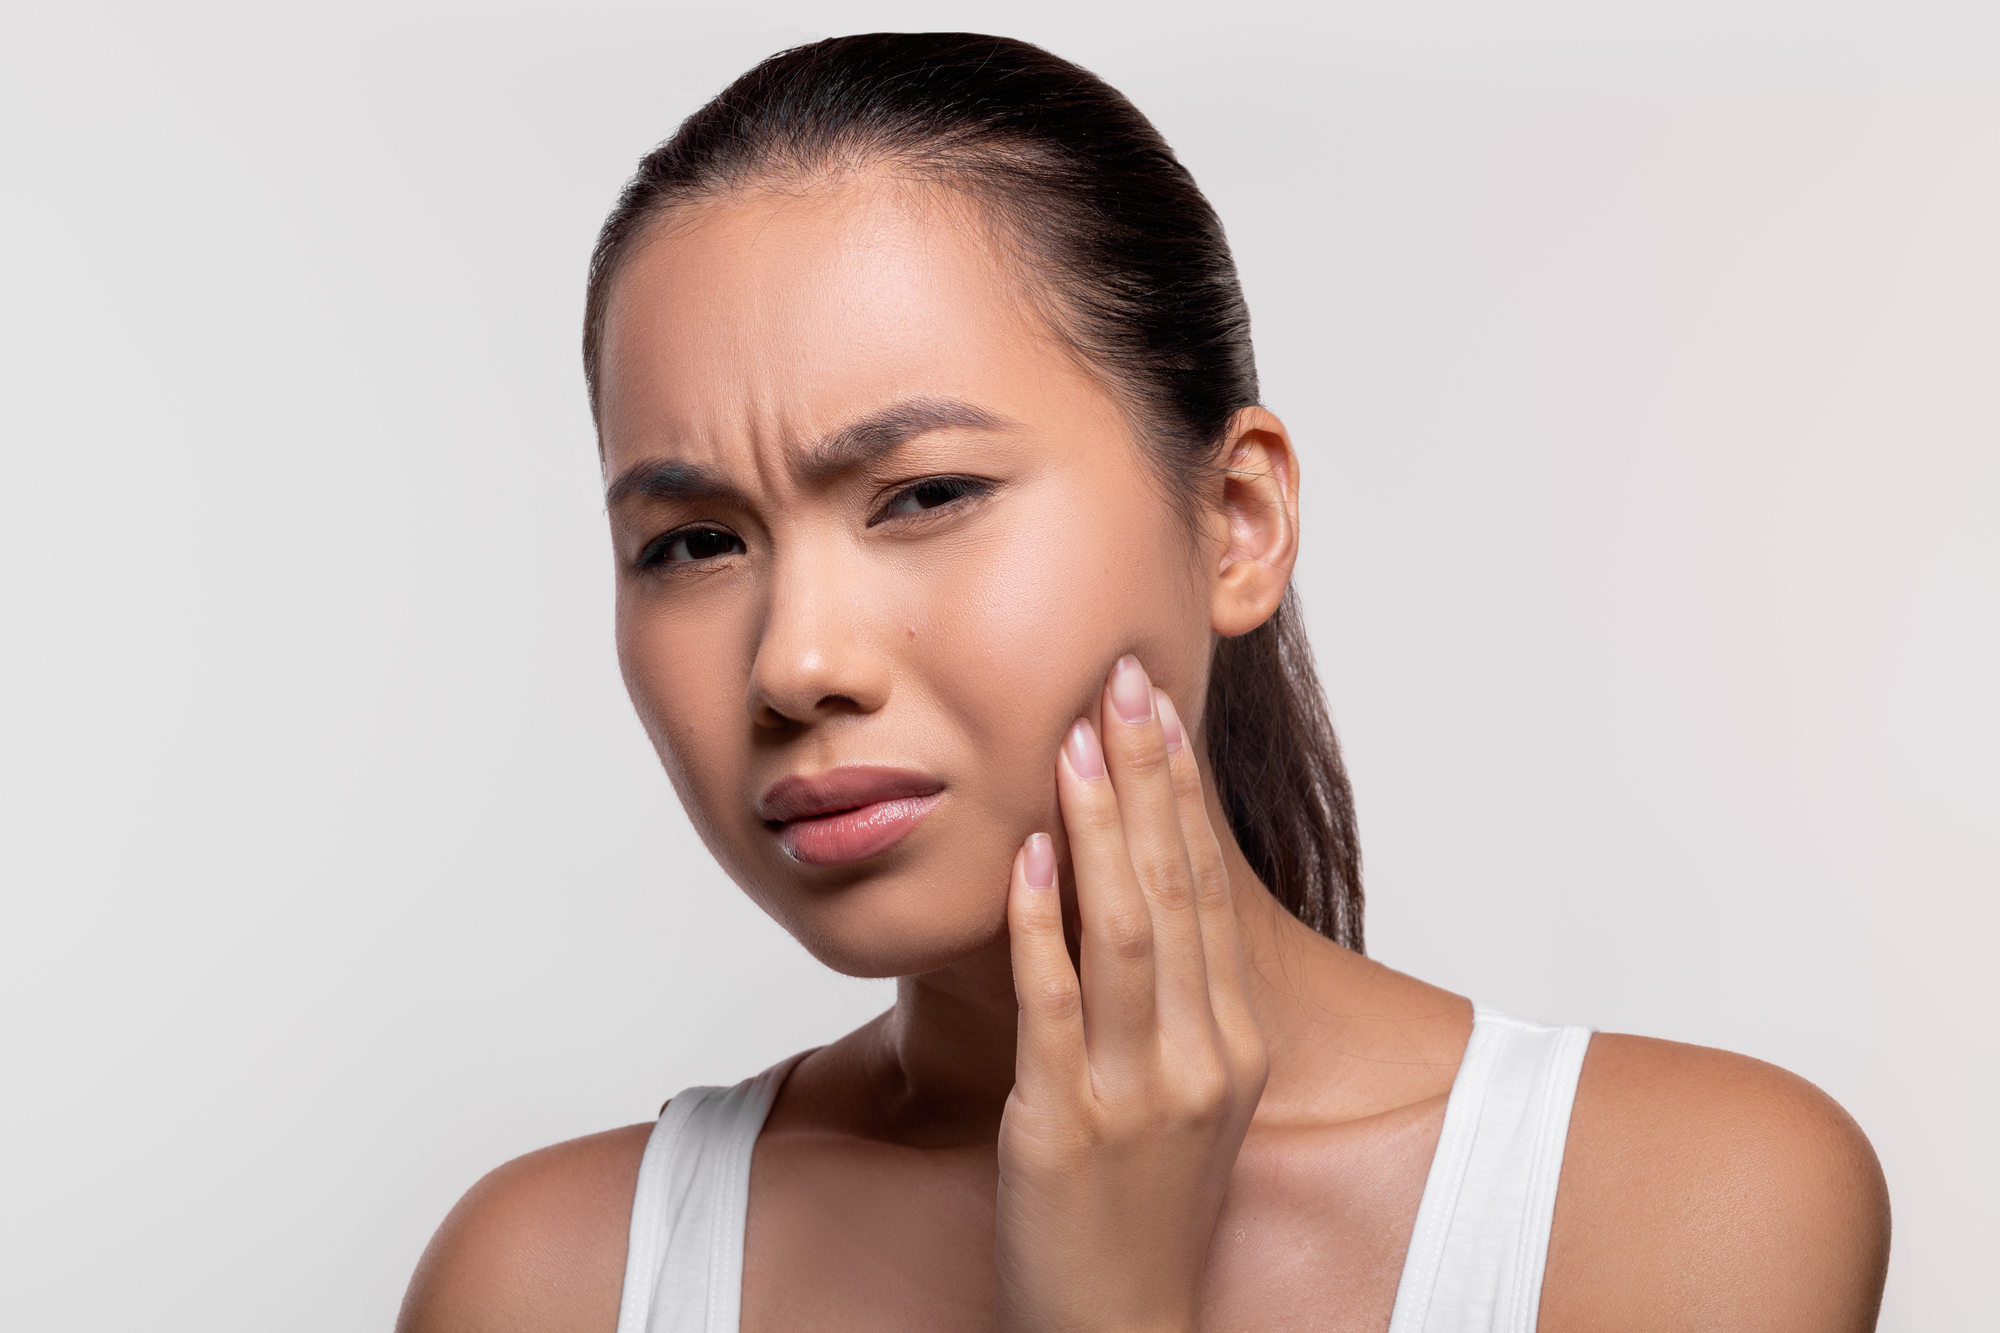 Wisdom tooth difficulties? Here’s what to do.